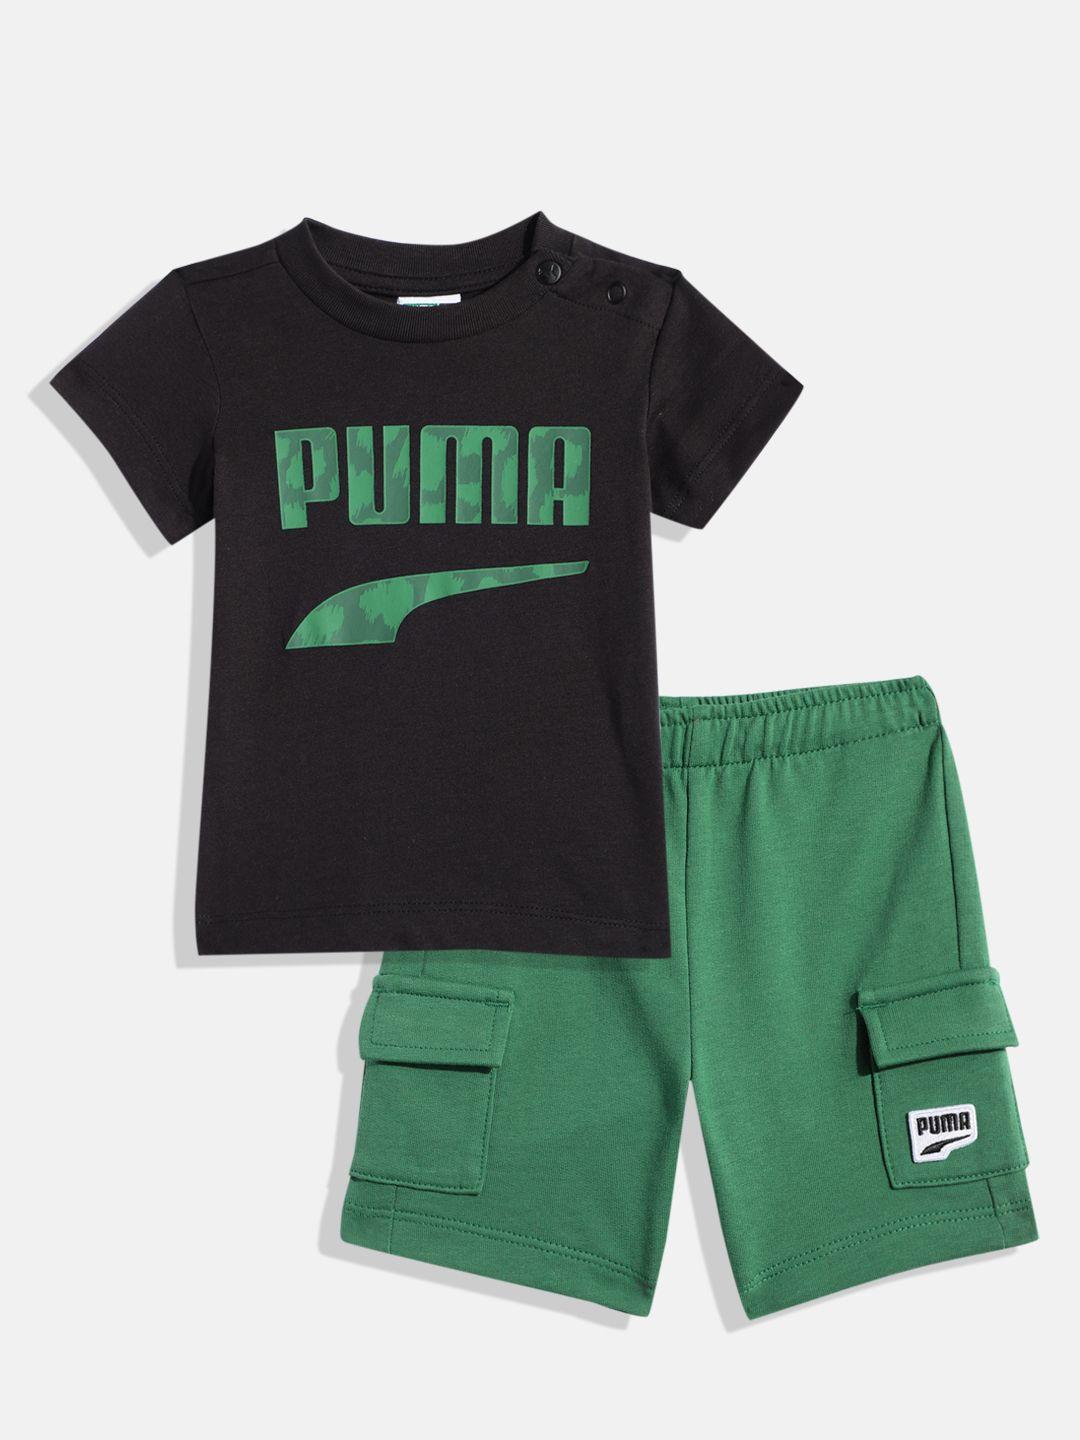 puma kids printed pure cotton t-shirt with shorts